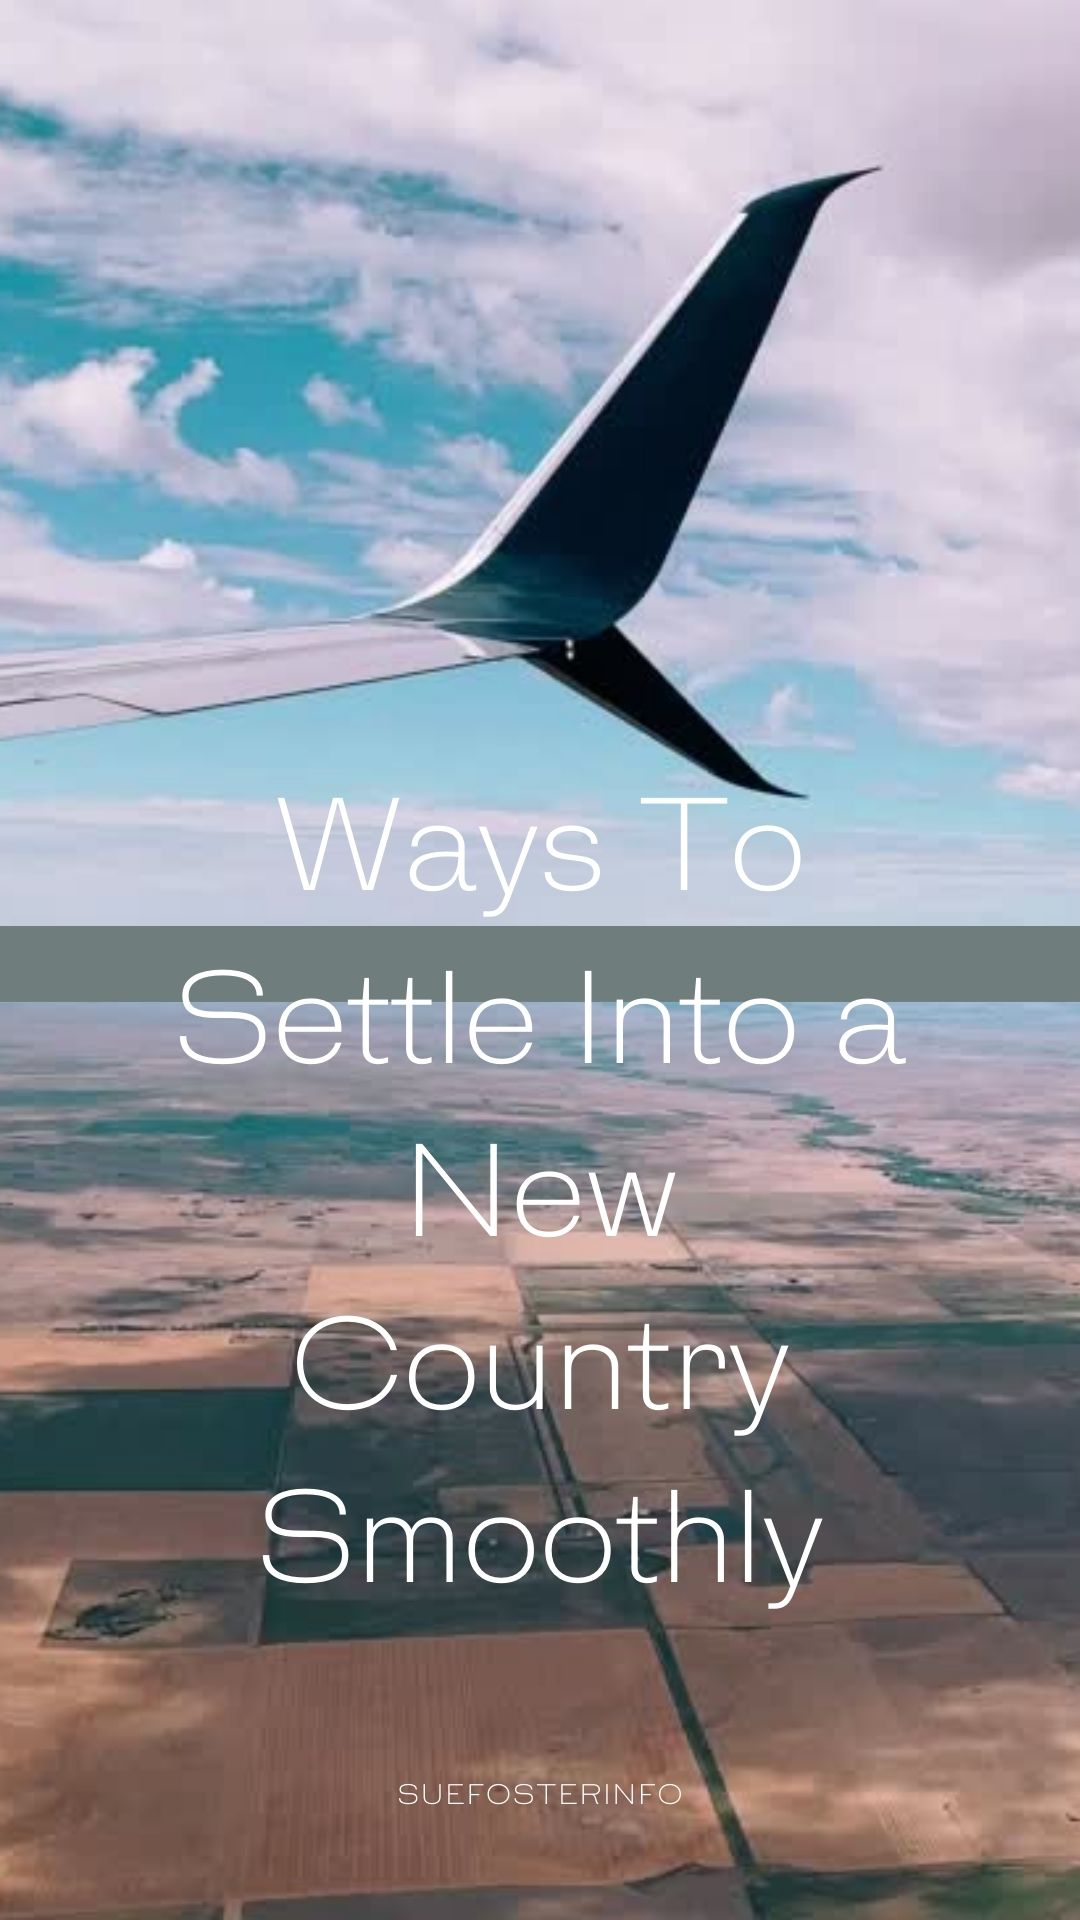 	
Moving to a new country can be difficult, but read these tips, and you'll be able to settle in smoothly and start enjoying your new home in no time.